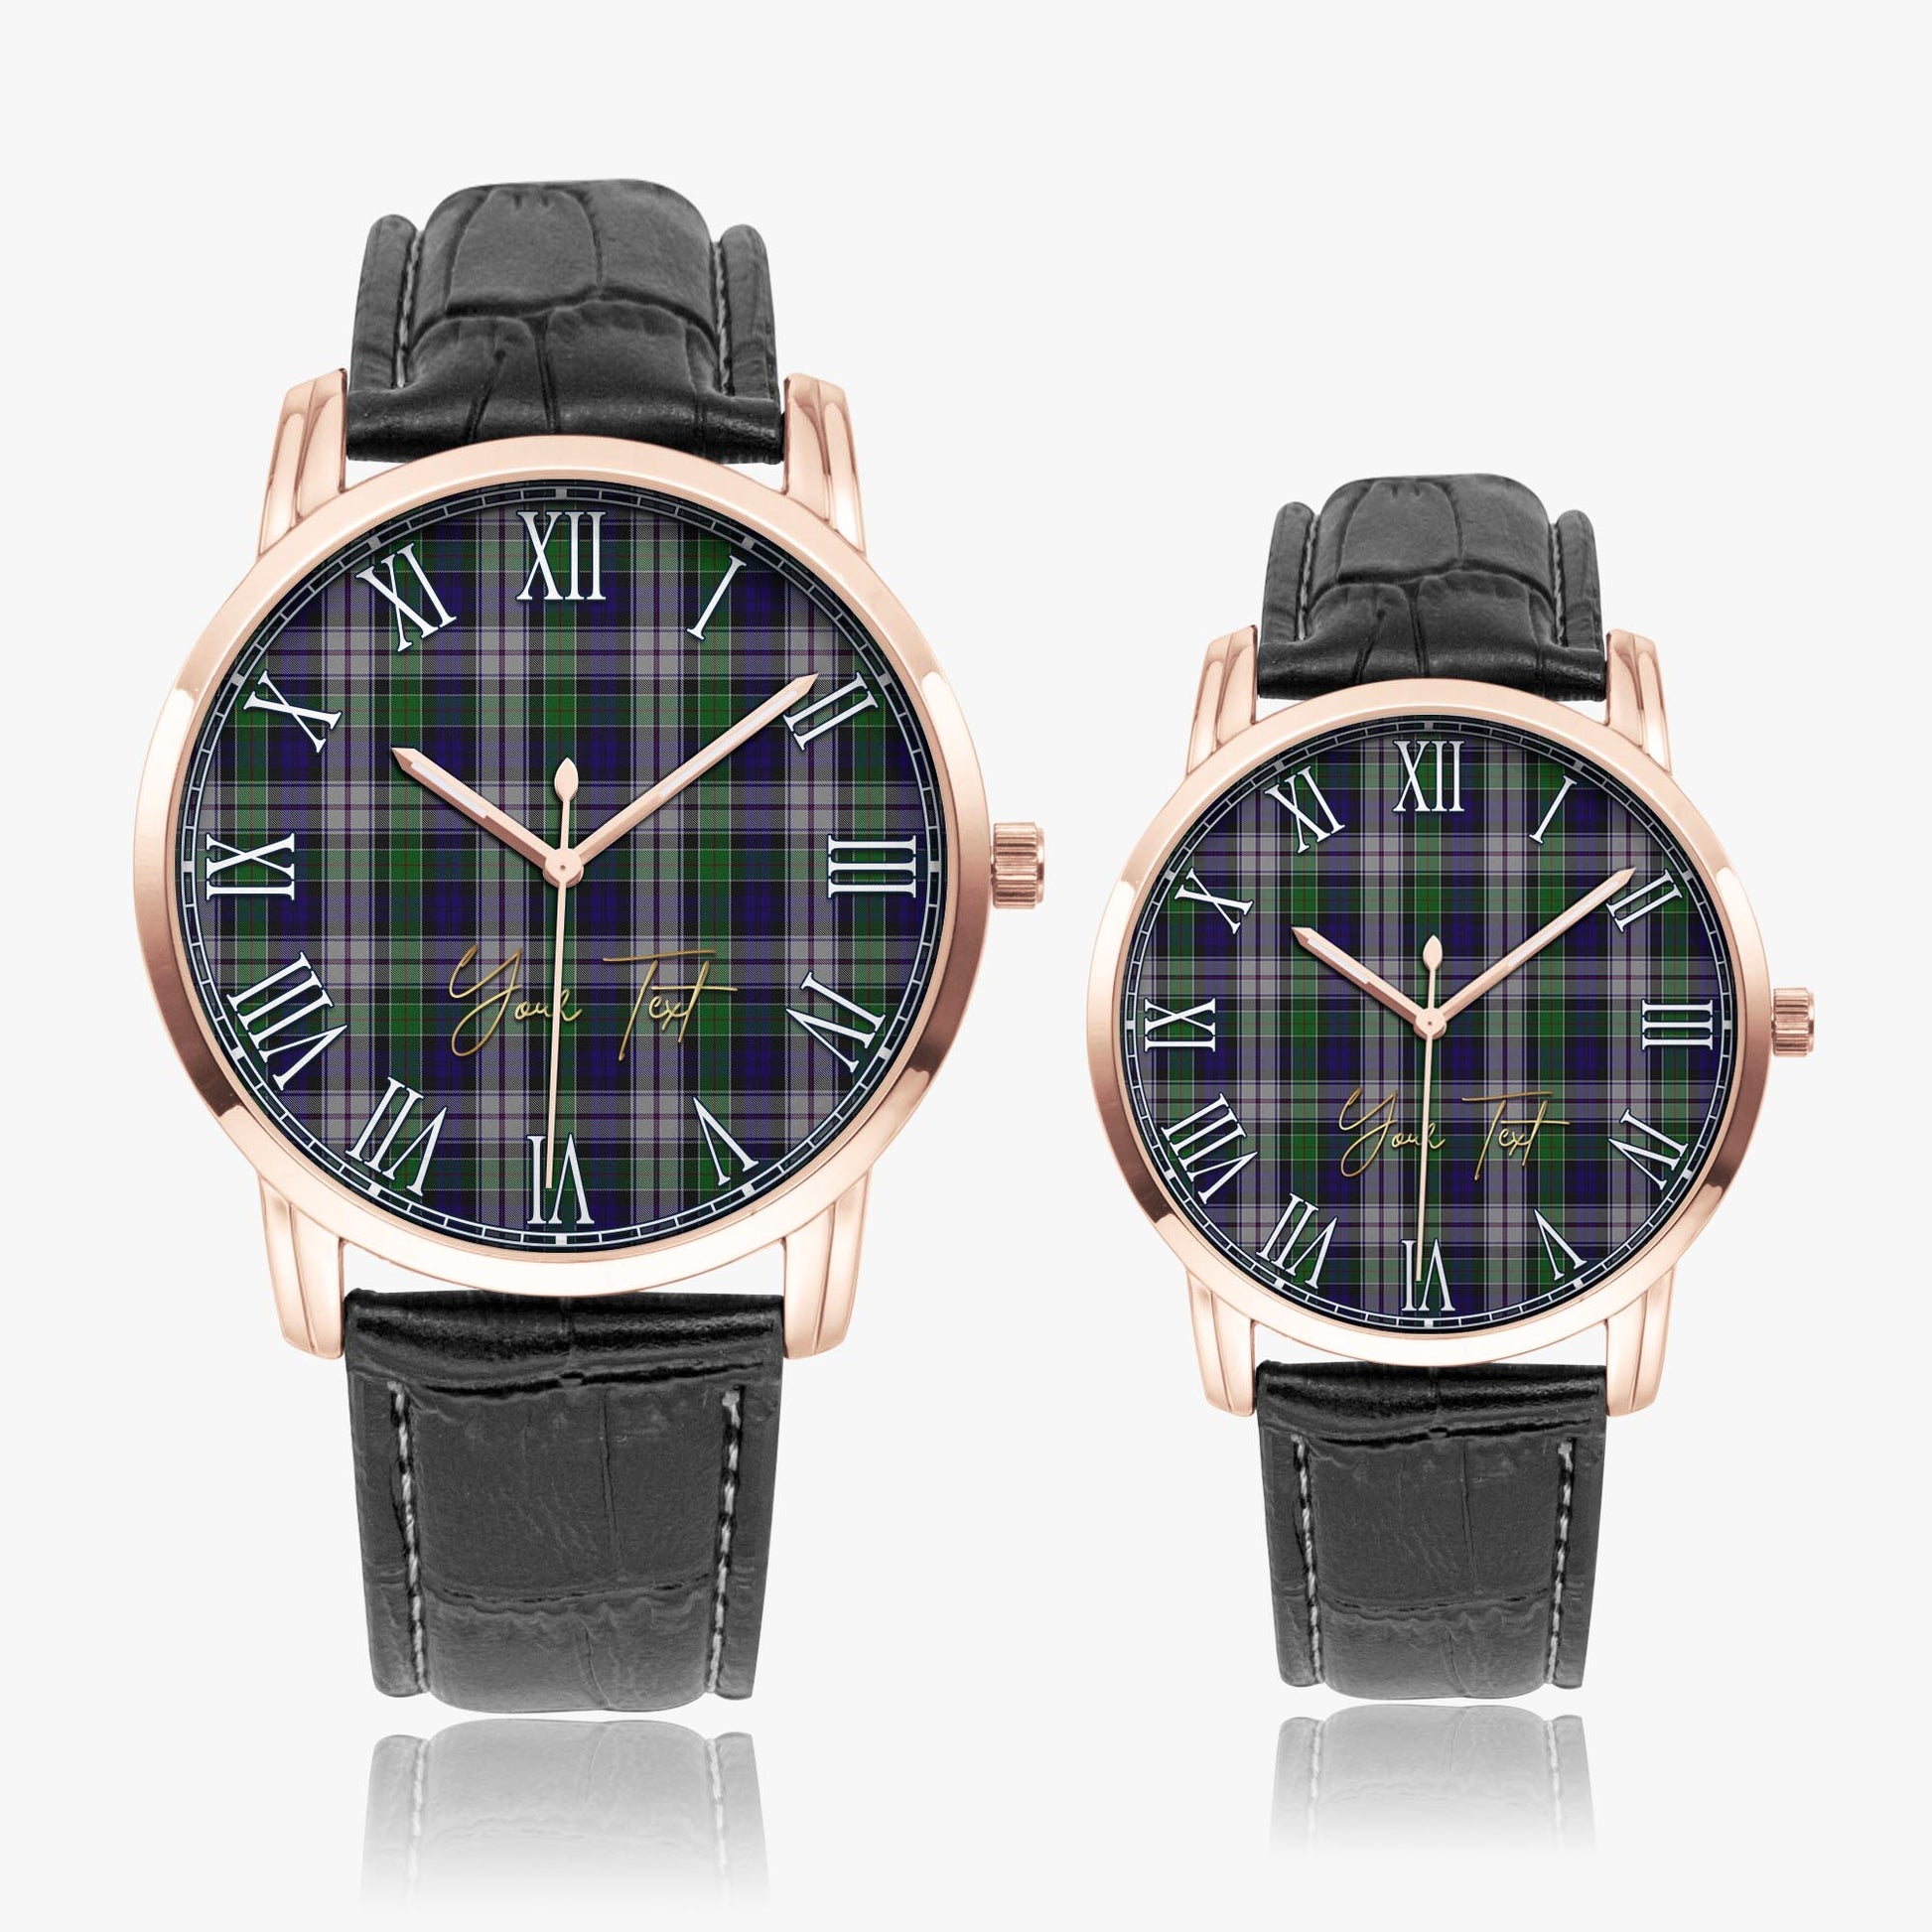 Colquhoun Dress Tartan Personalized Your Text Leather Trap Quartz Watch Wide Type Rose Gold Case With Black Leather Strap - Tartanvibesclothing